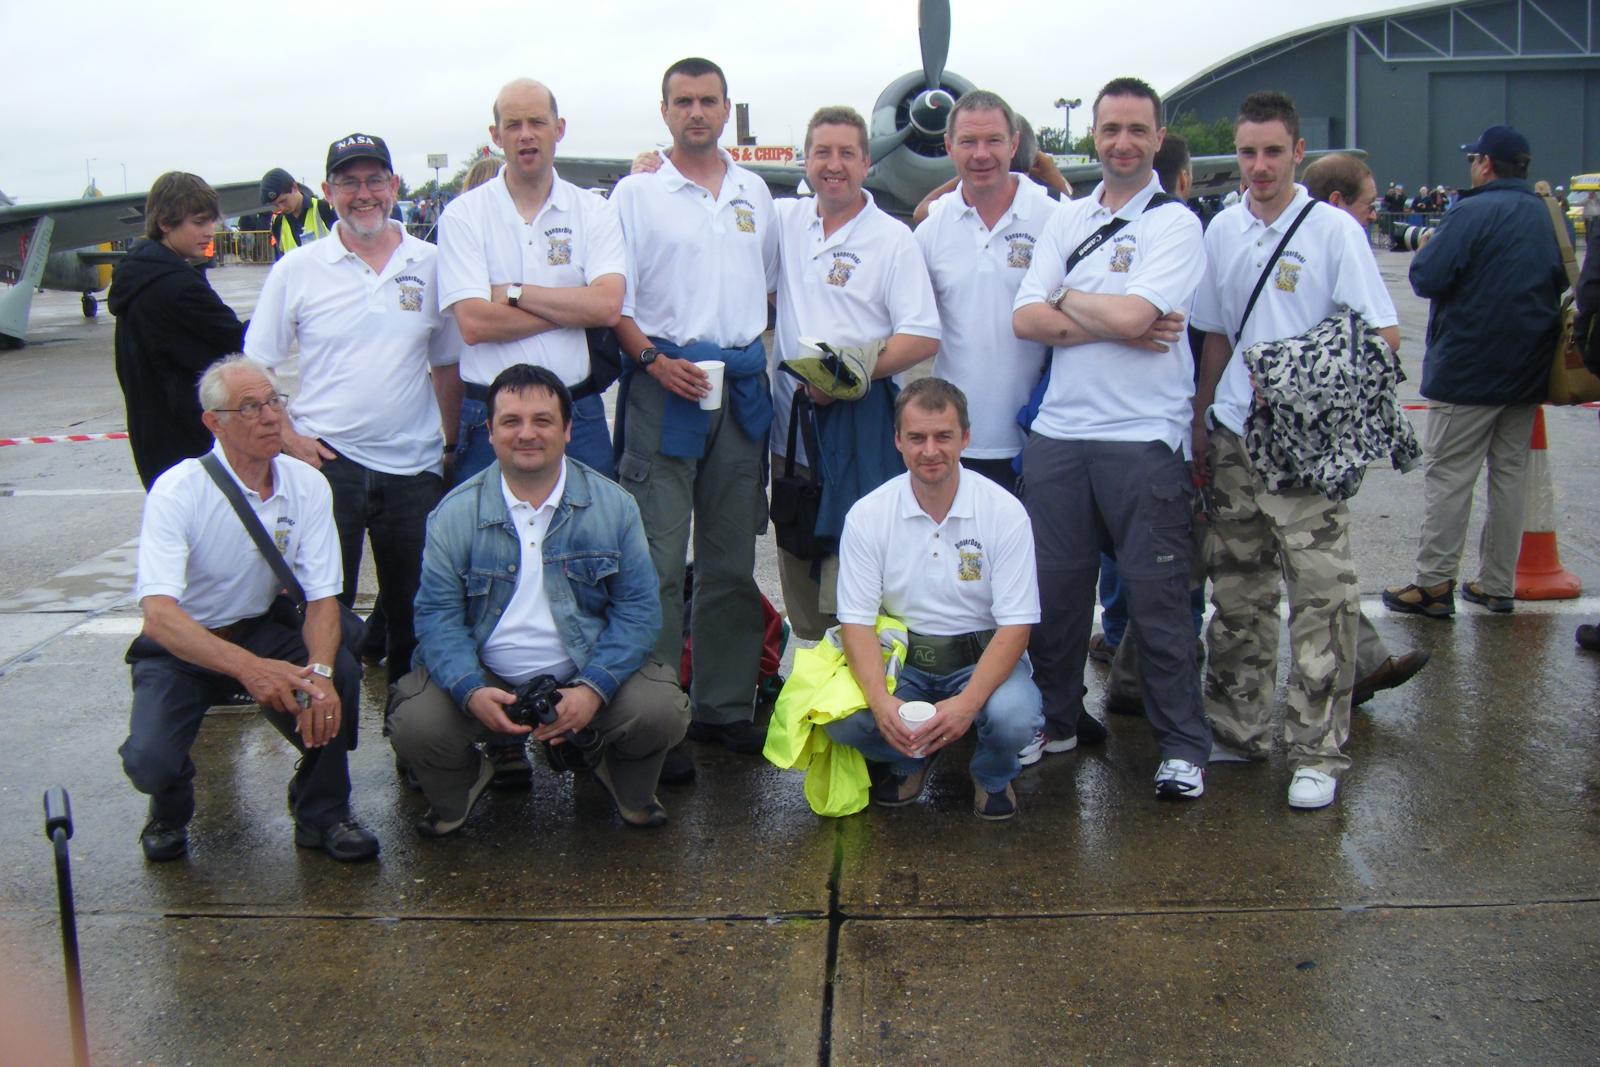 23-dogs_at_duxford.jpg